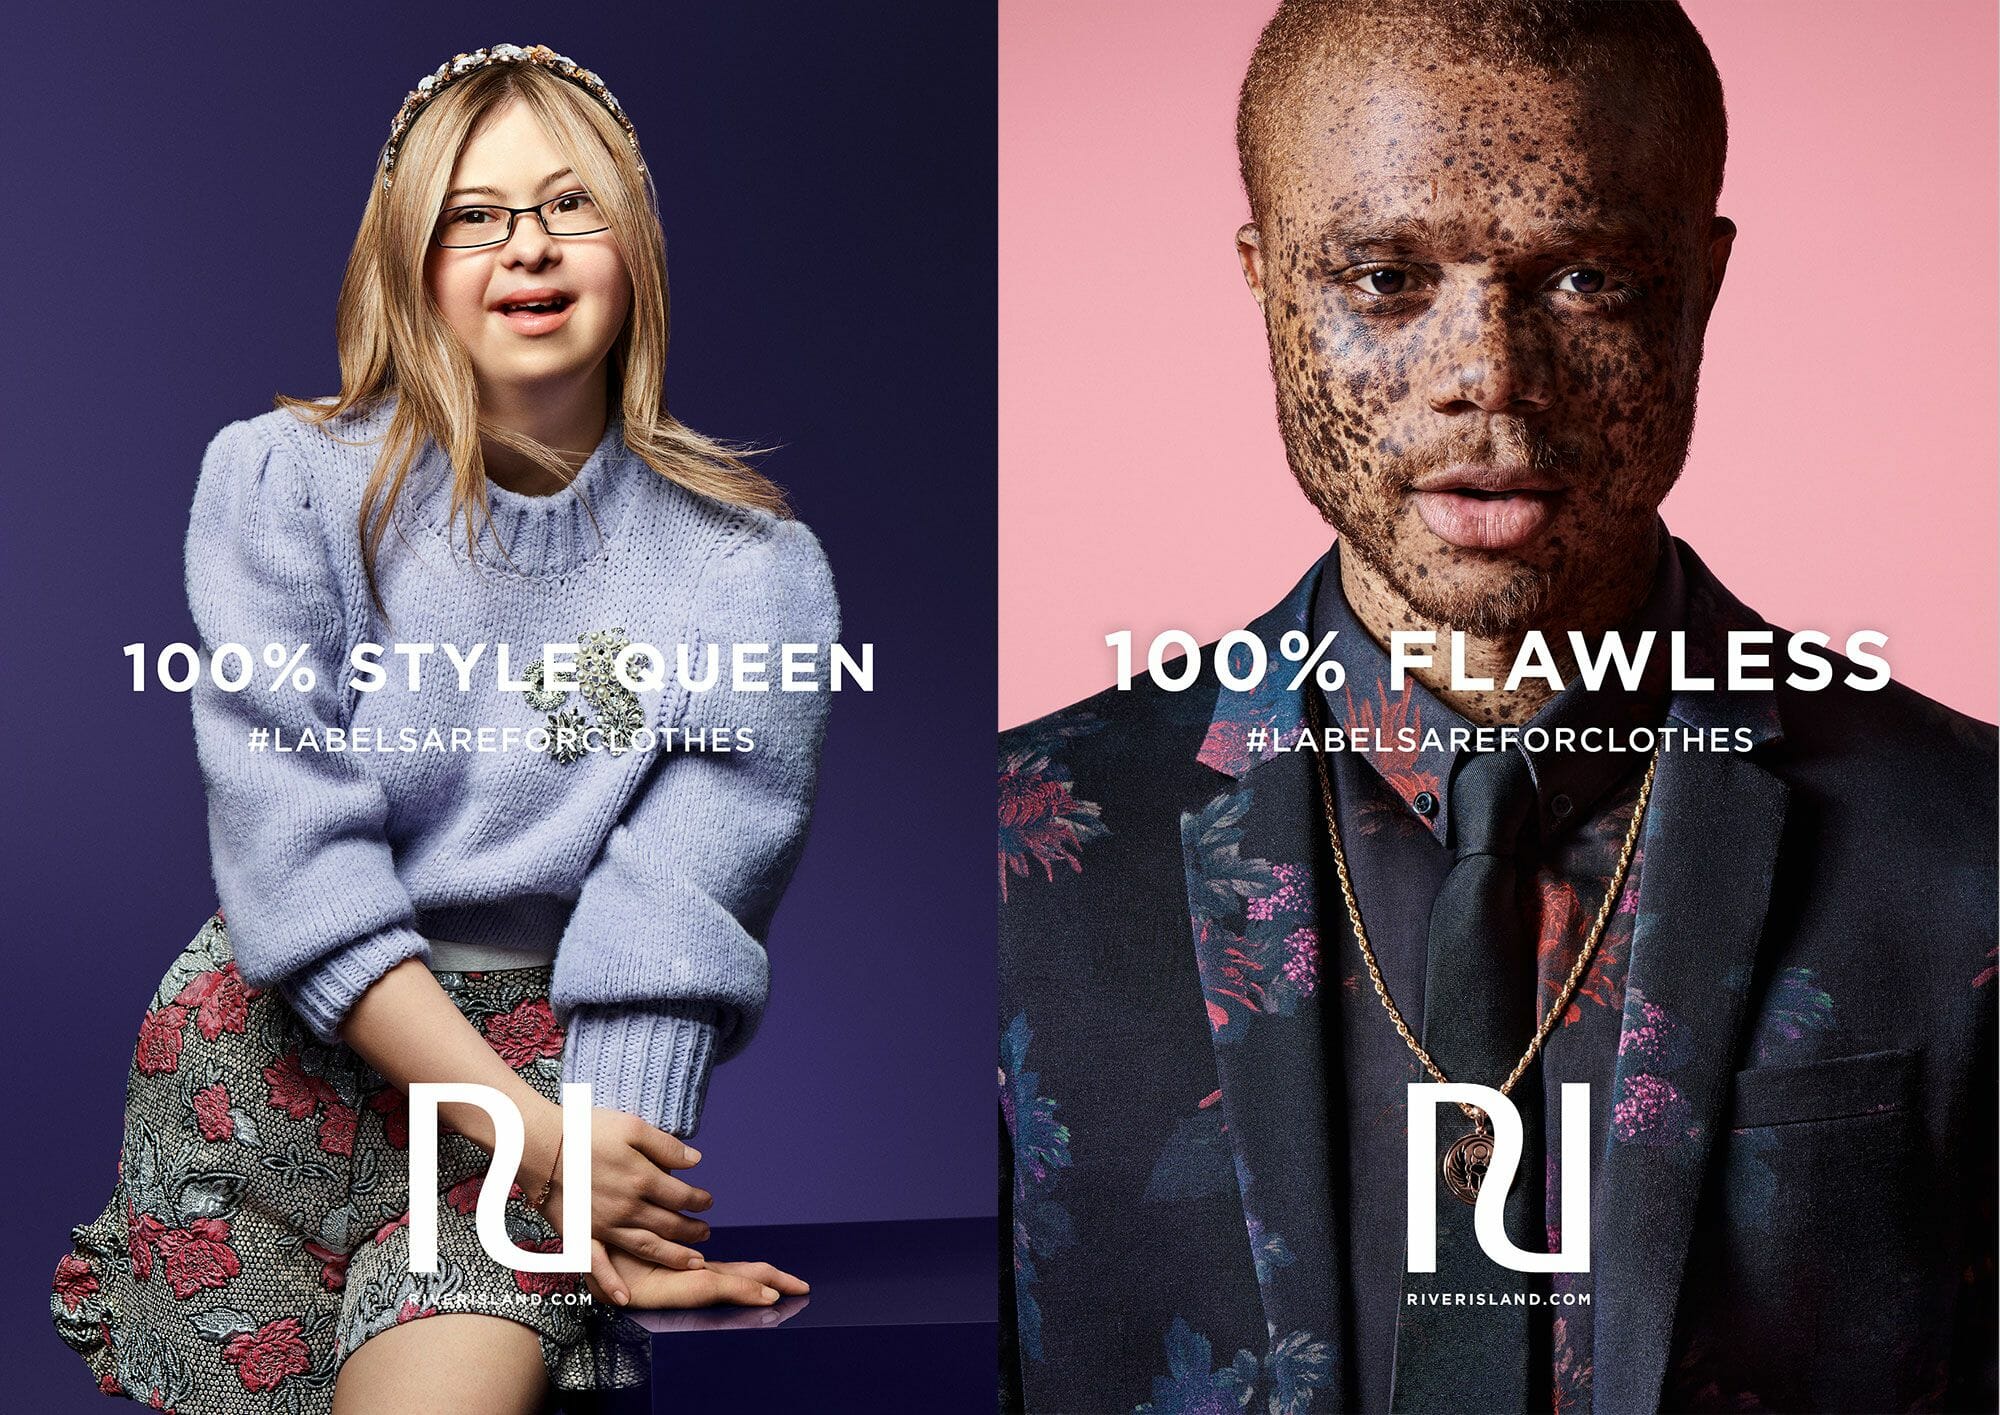 River Island Labels are for Clothes Campaign